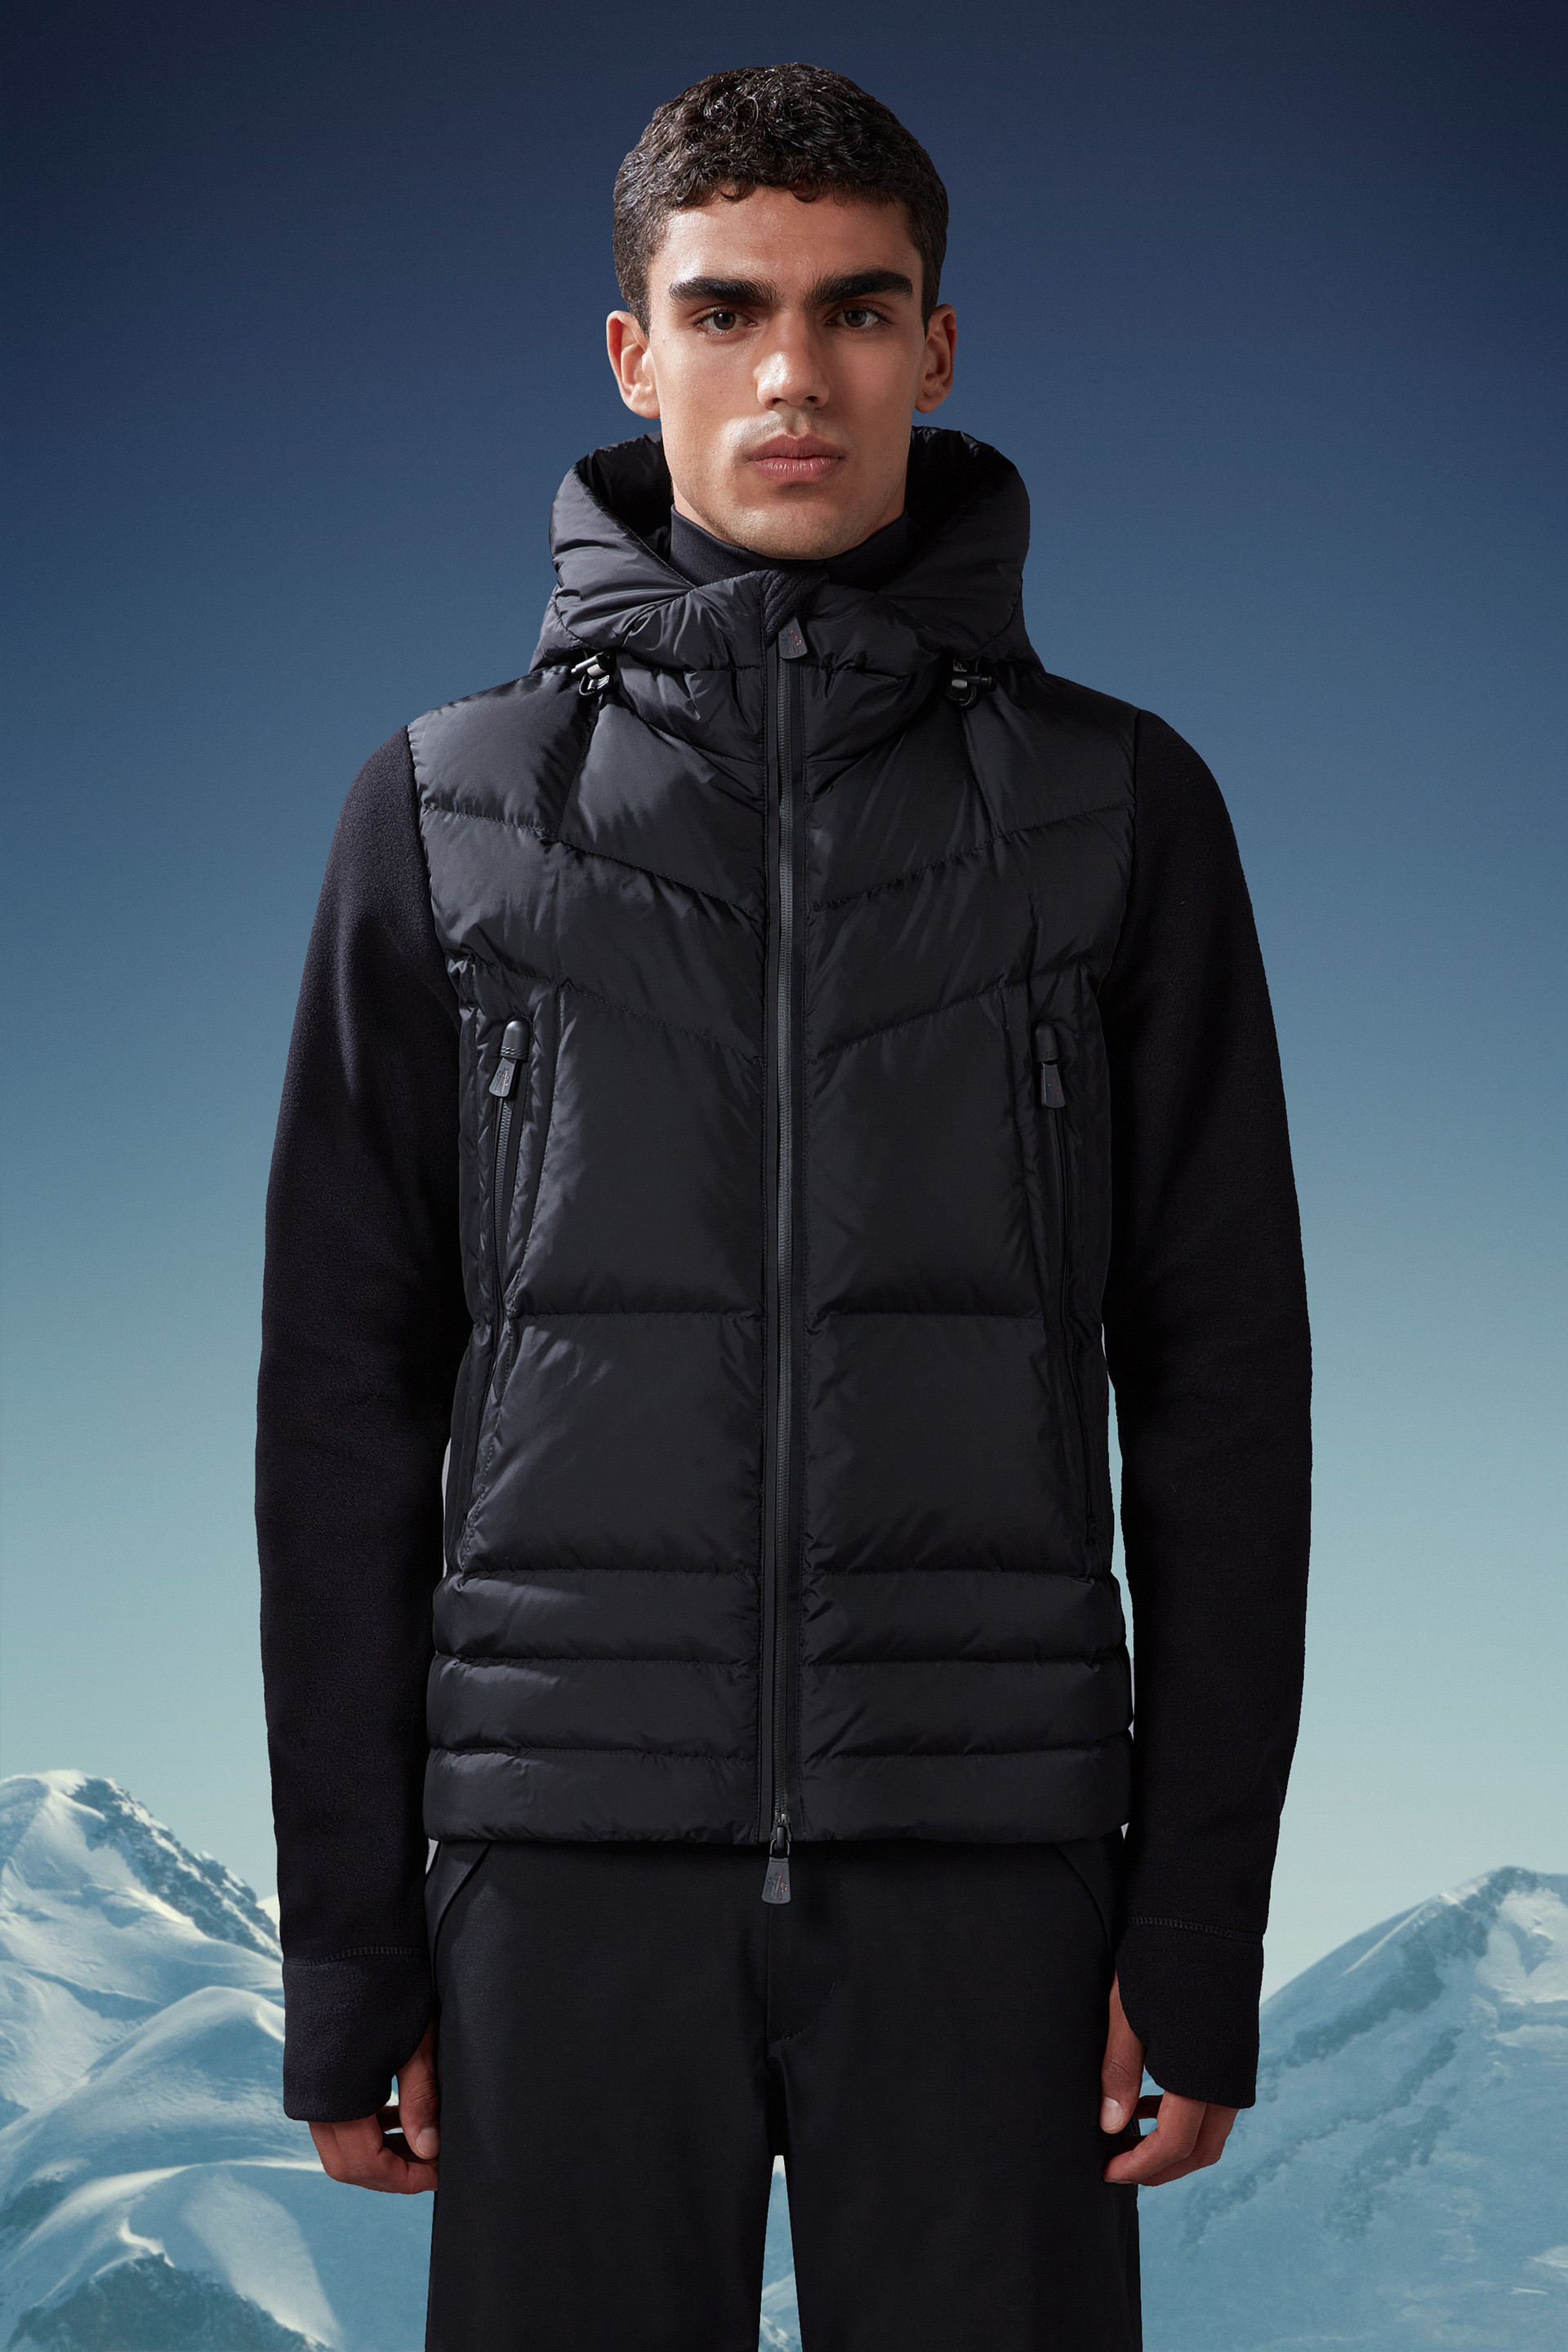 MONCLER FETUQUE 22-23AWジップアップパーカー size2カラー999ブラック